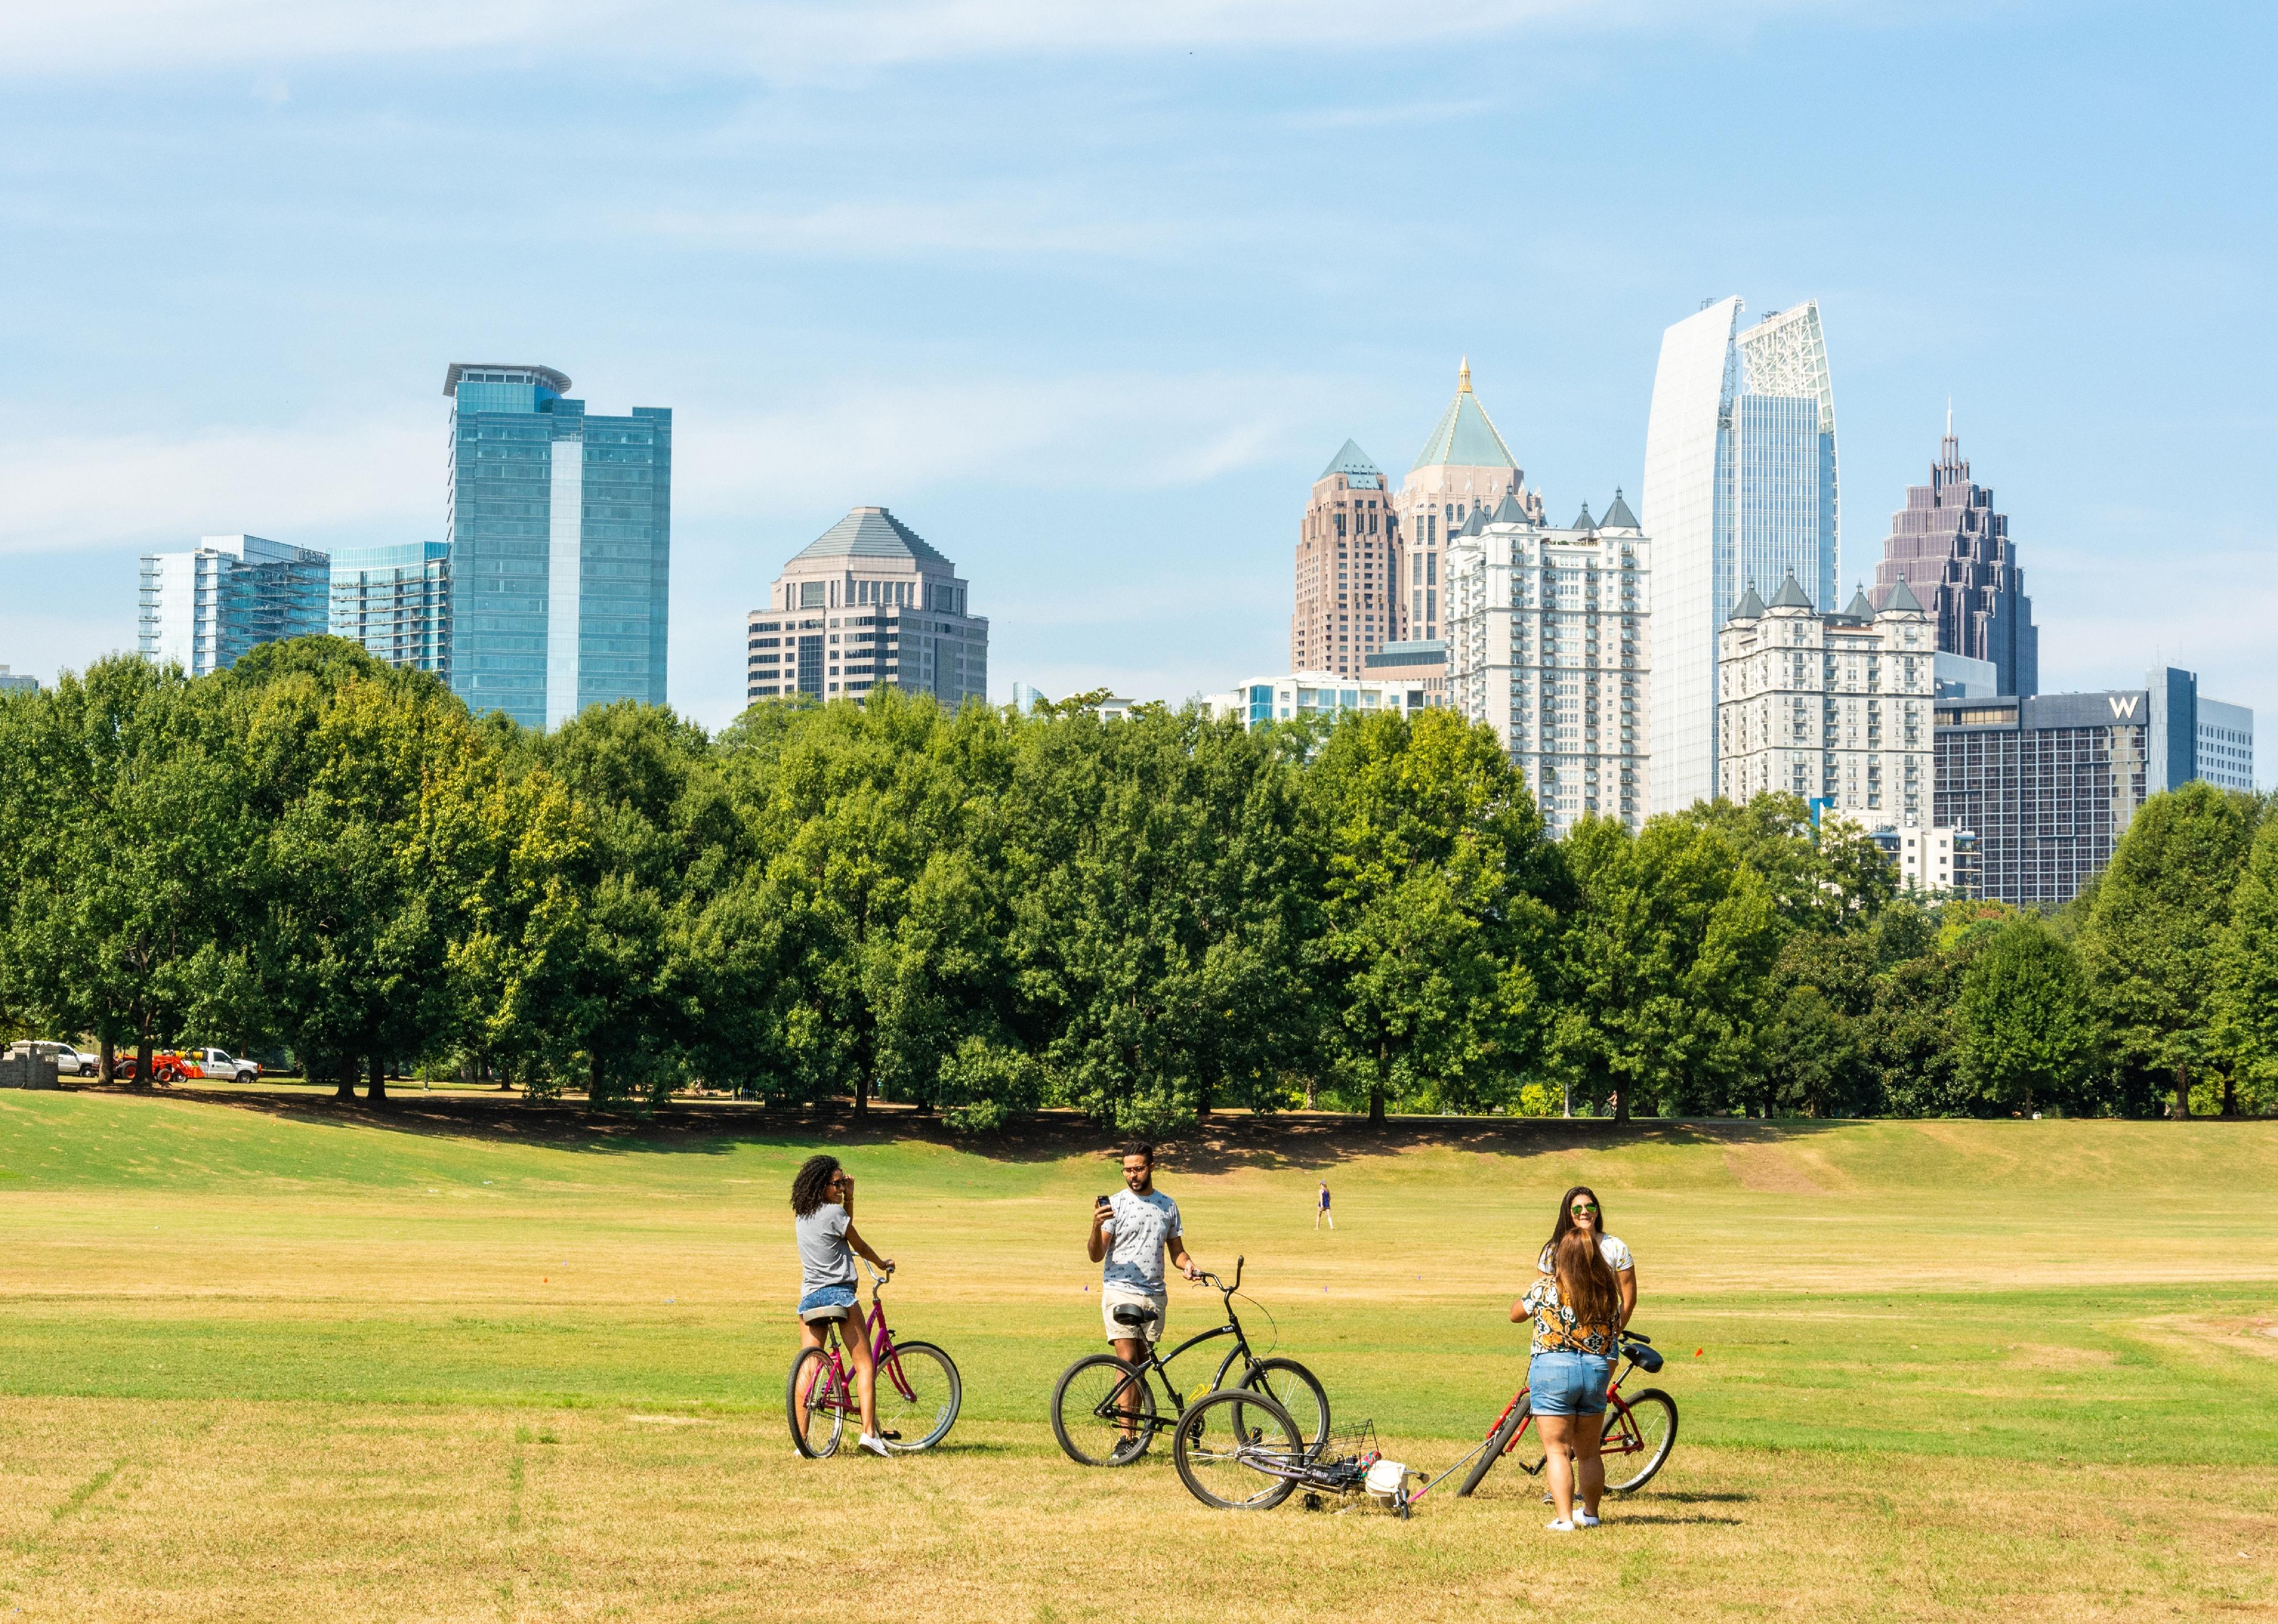 View of the the Midtown Skyline in Atlanta, GA with people and bikes in the foreground